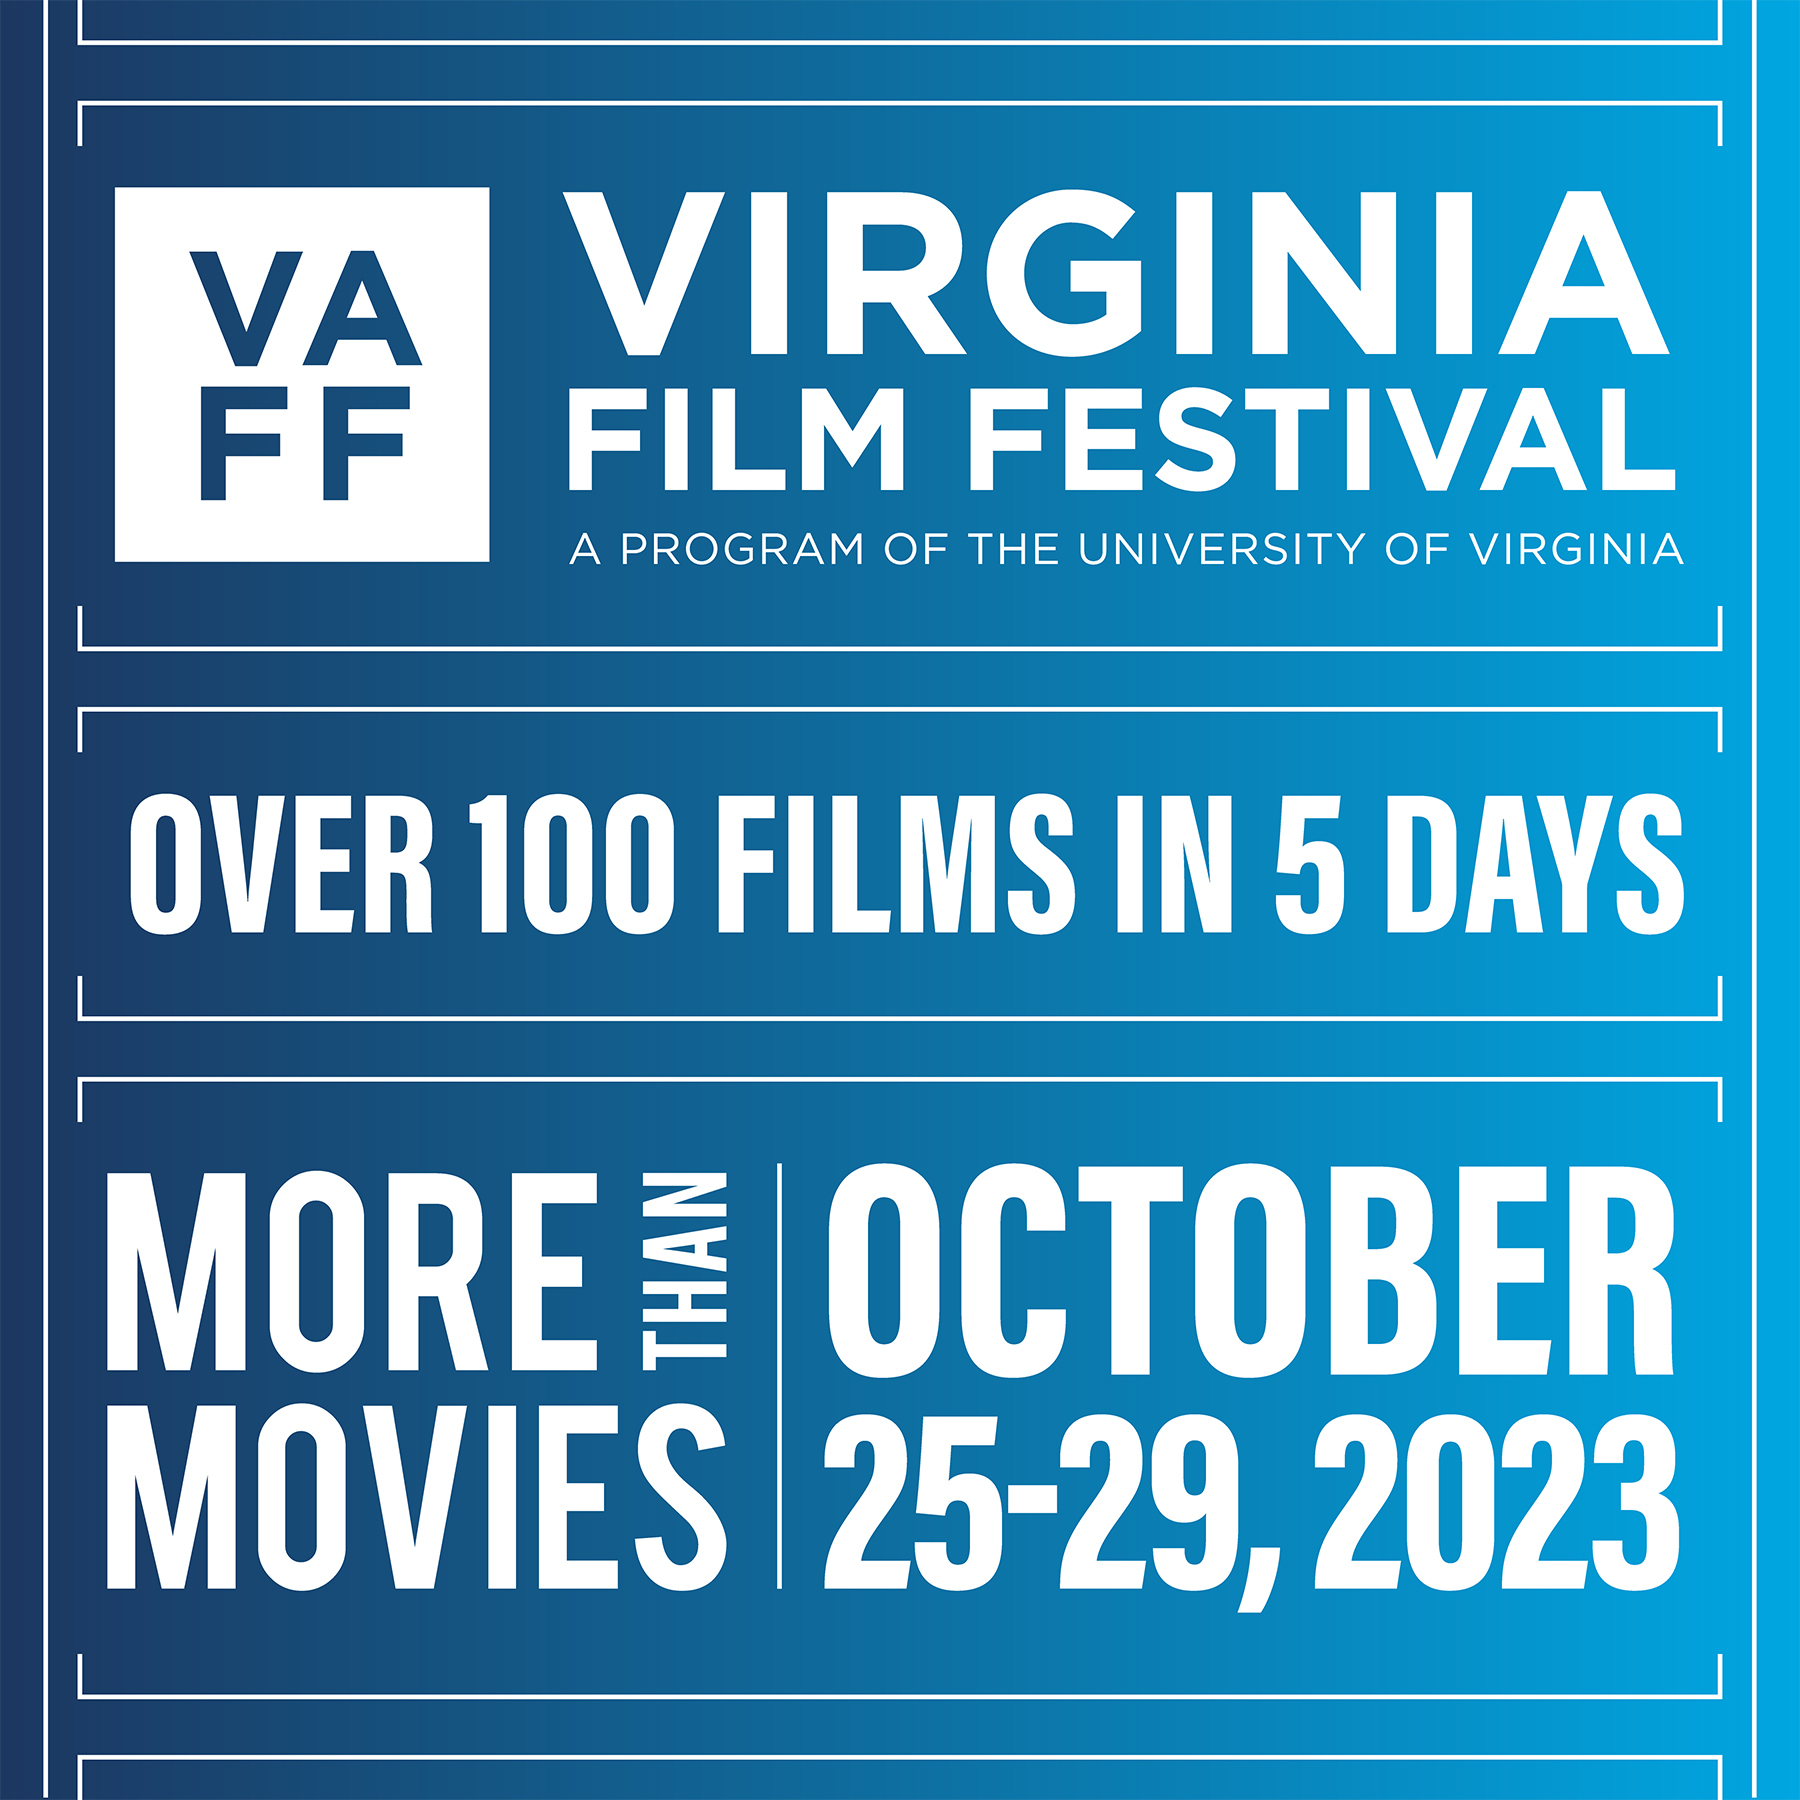 Virginia Film Festival Over 100 Films in 5 Days, More Than Movies, October 25-29, 2023